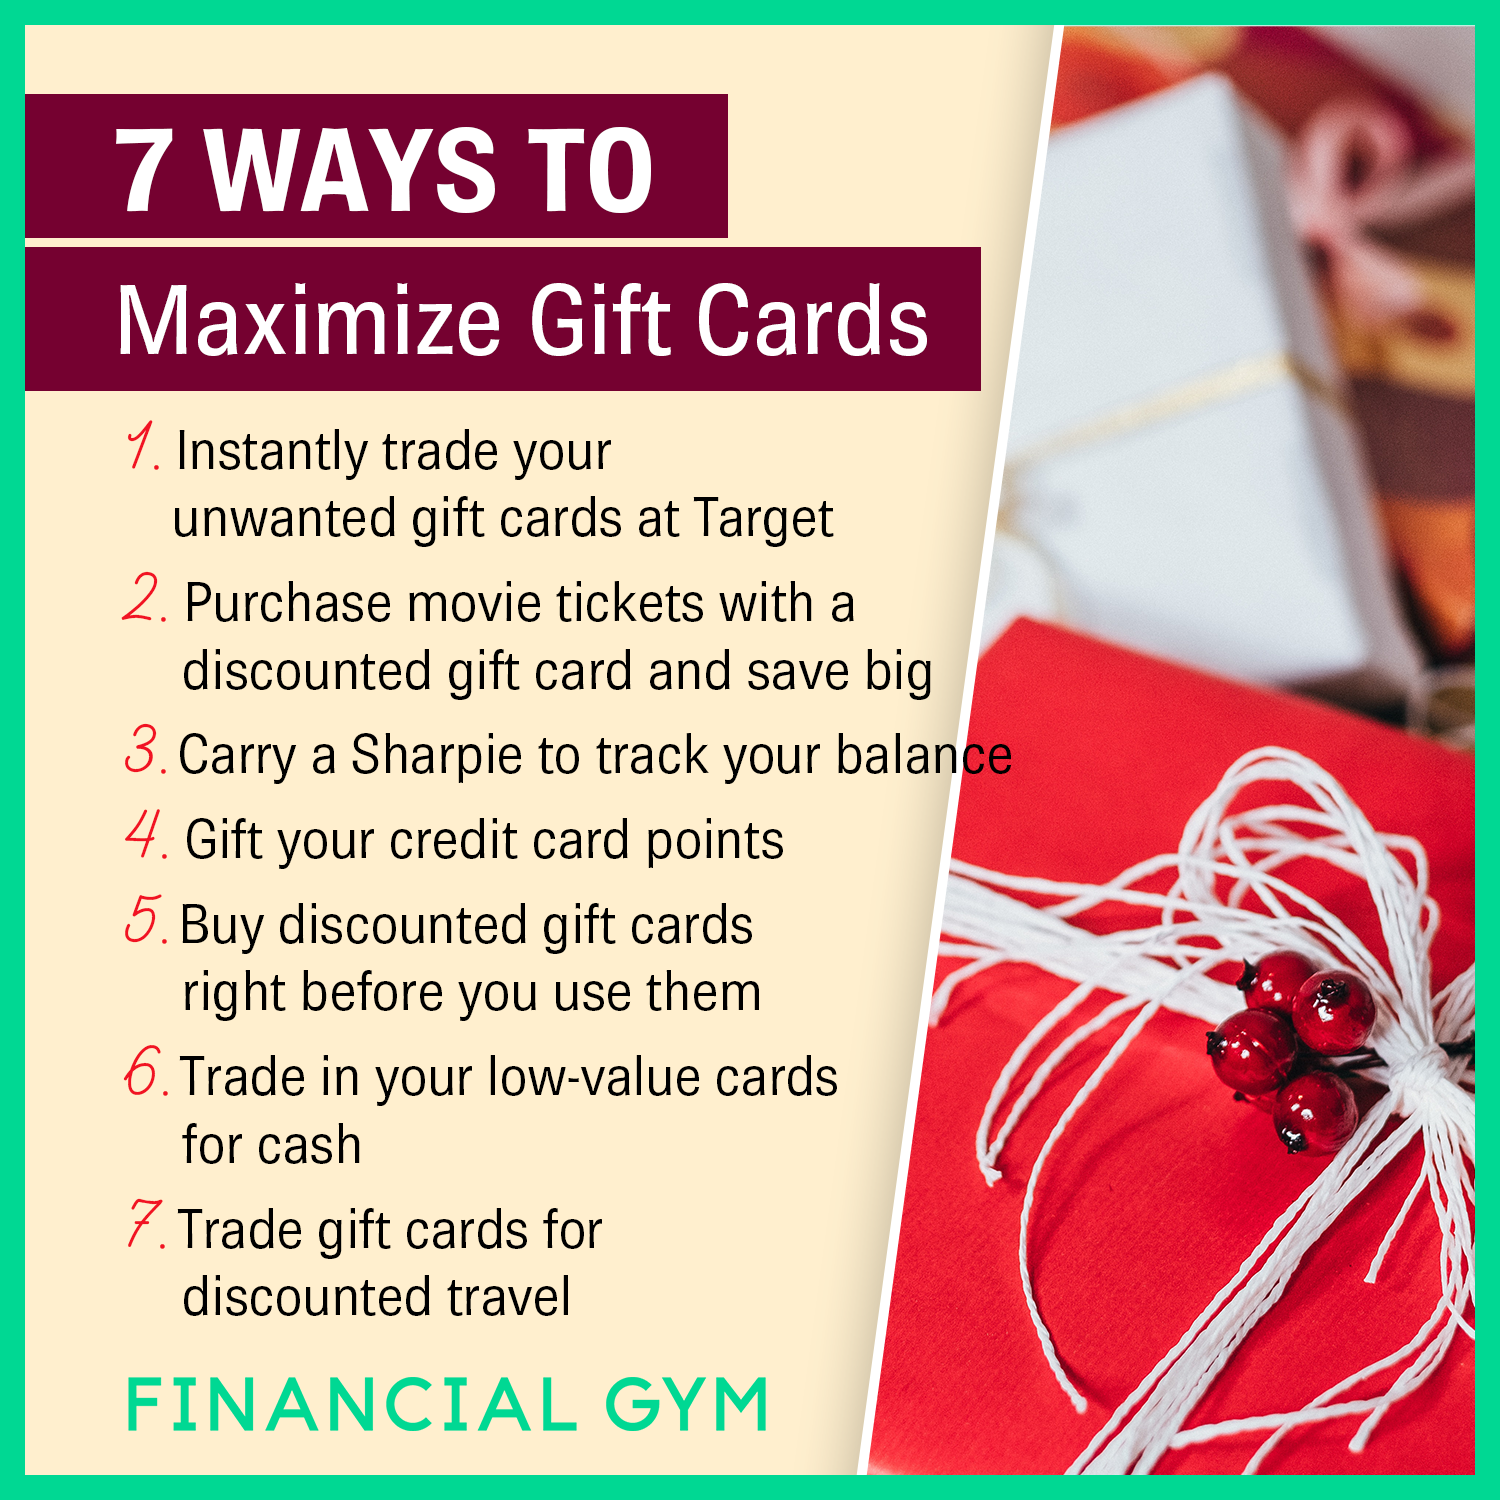 7 Ways to Maximize Gift Cards